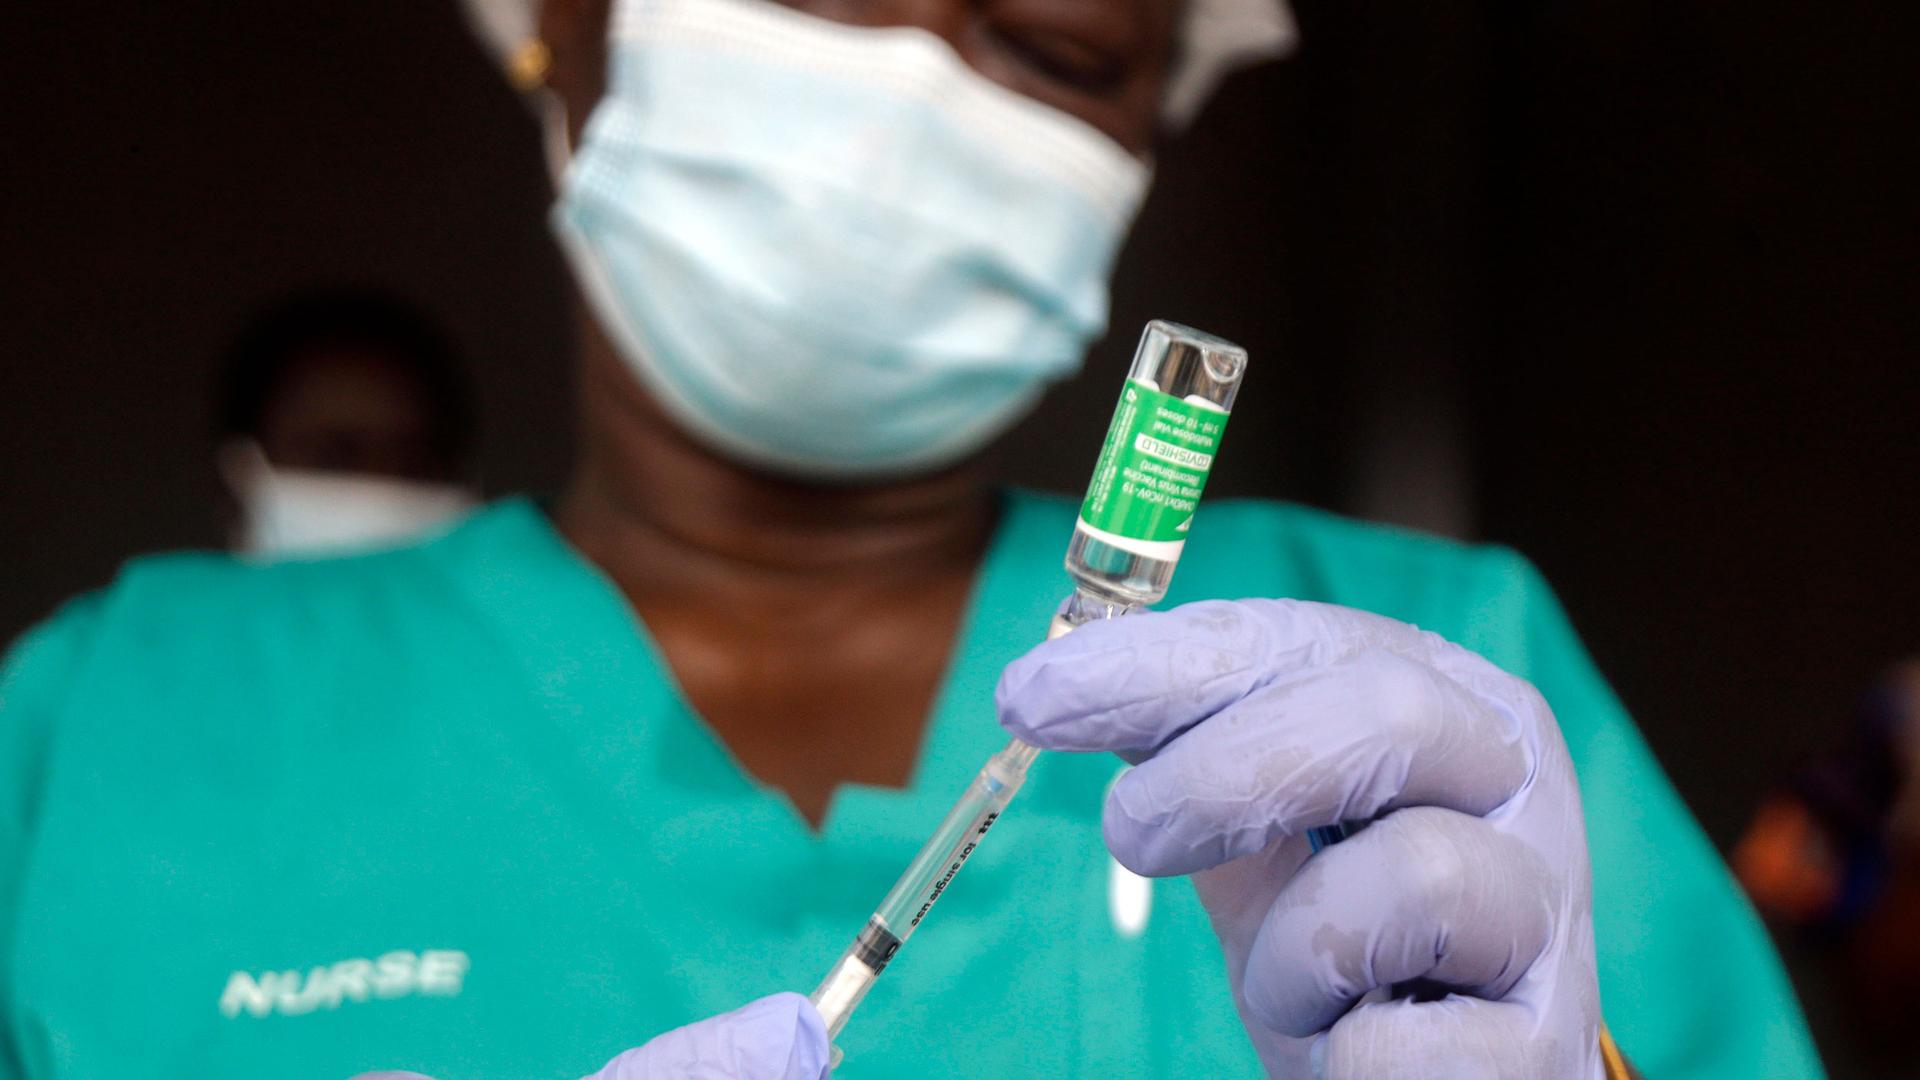 A close up photograph of a syringe is shown with a nurse in soft focus in the background.